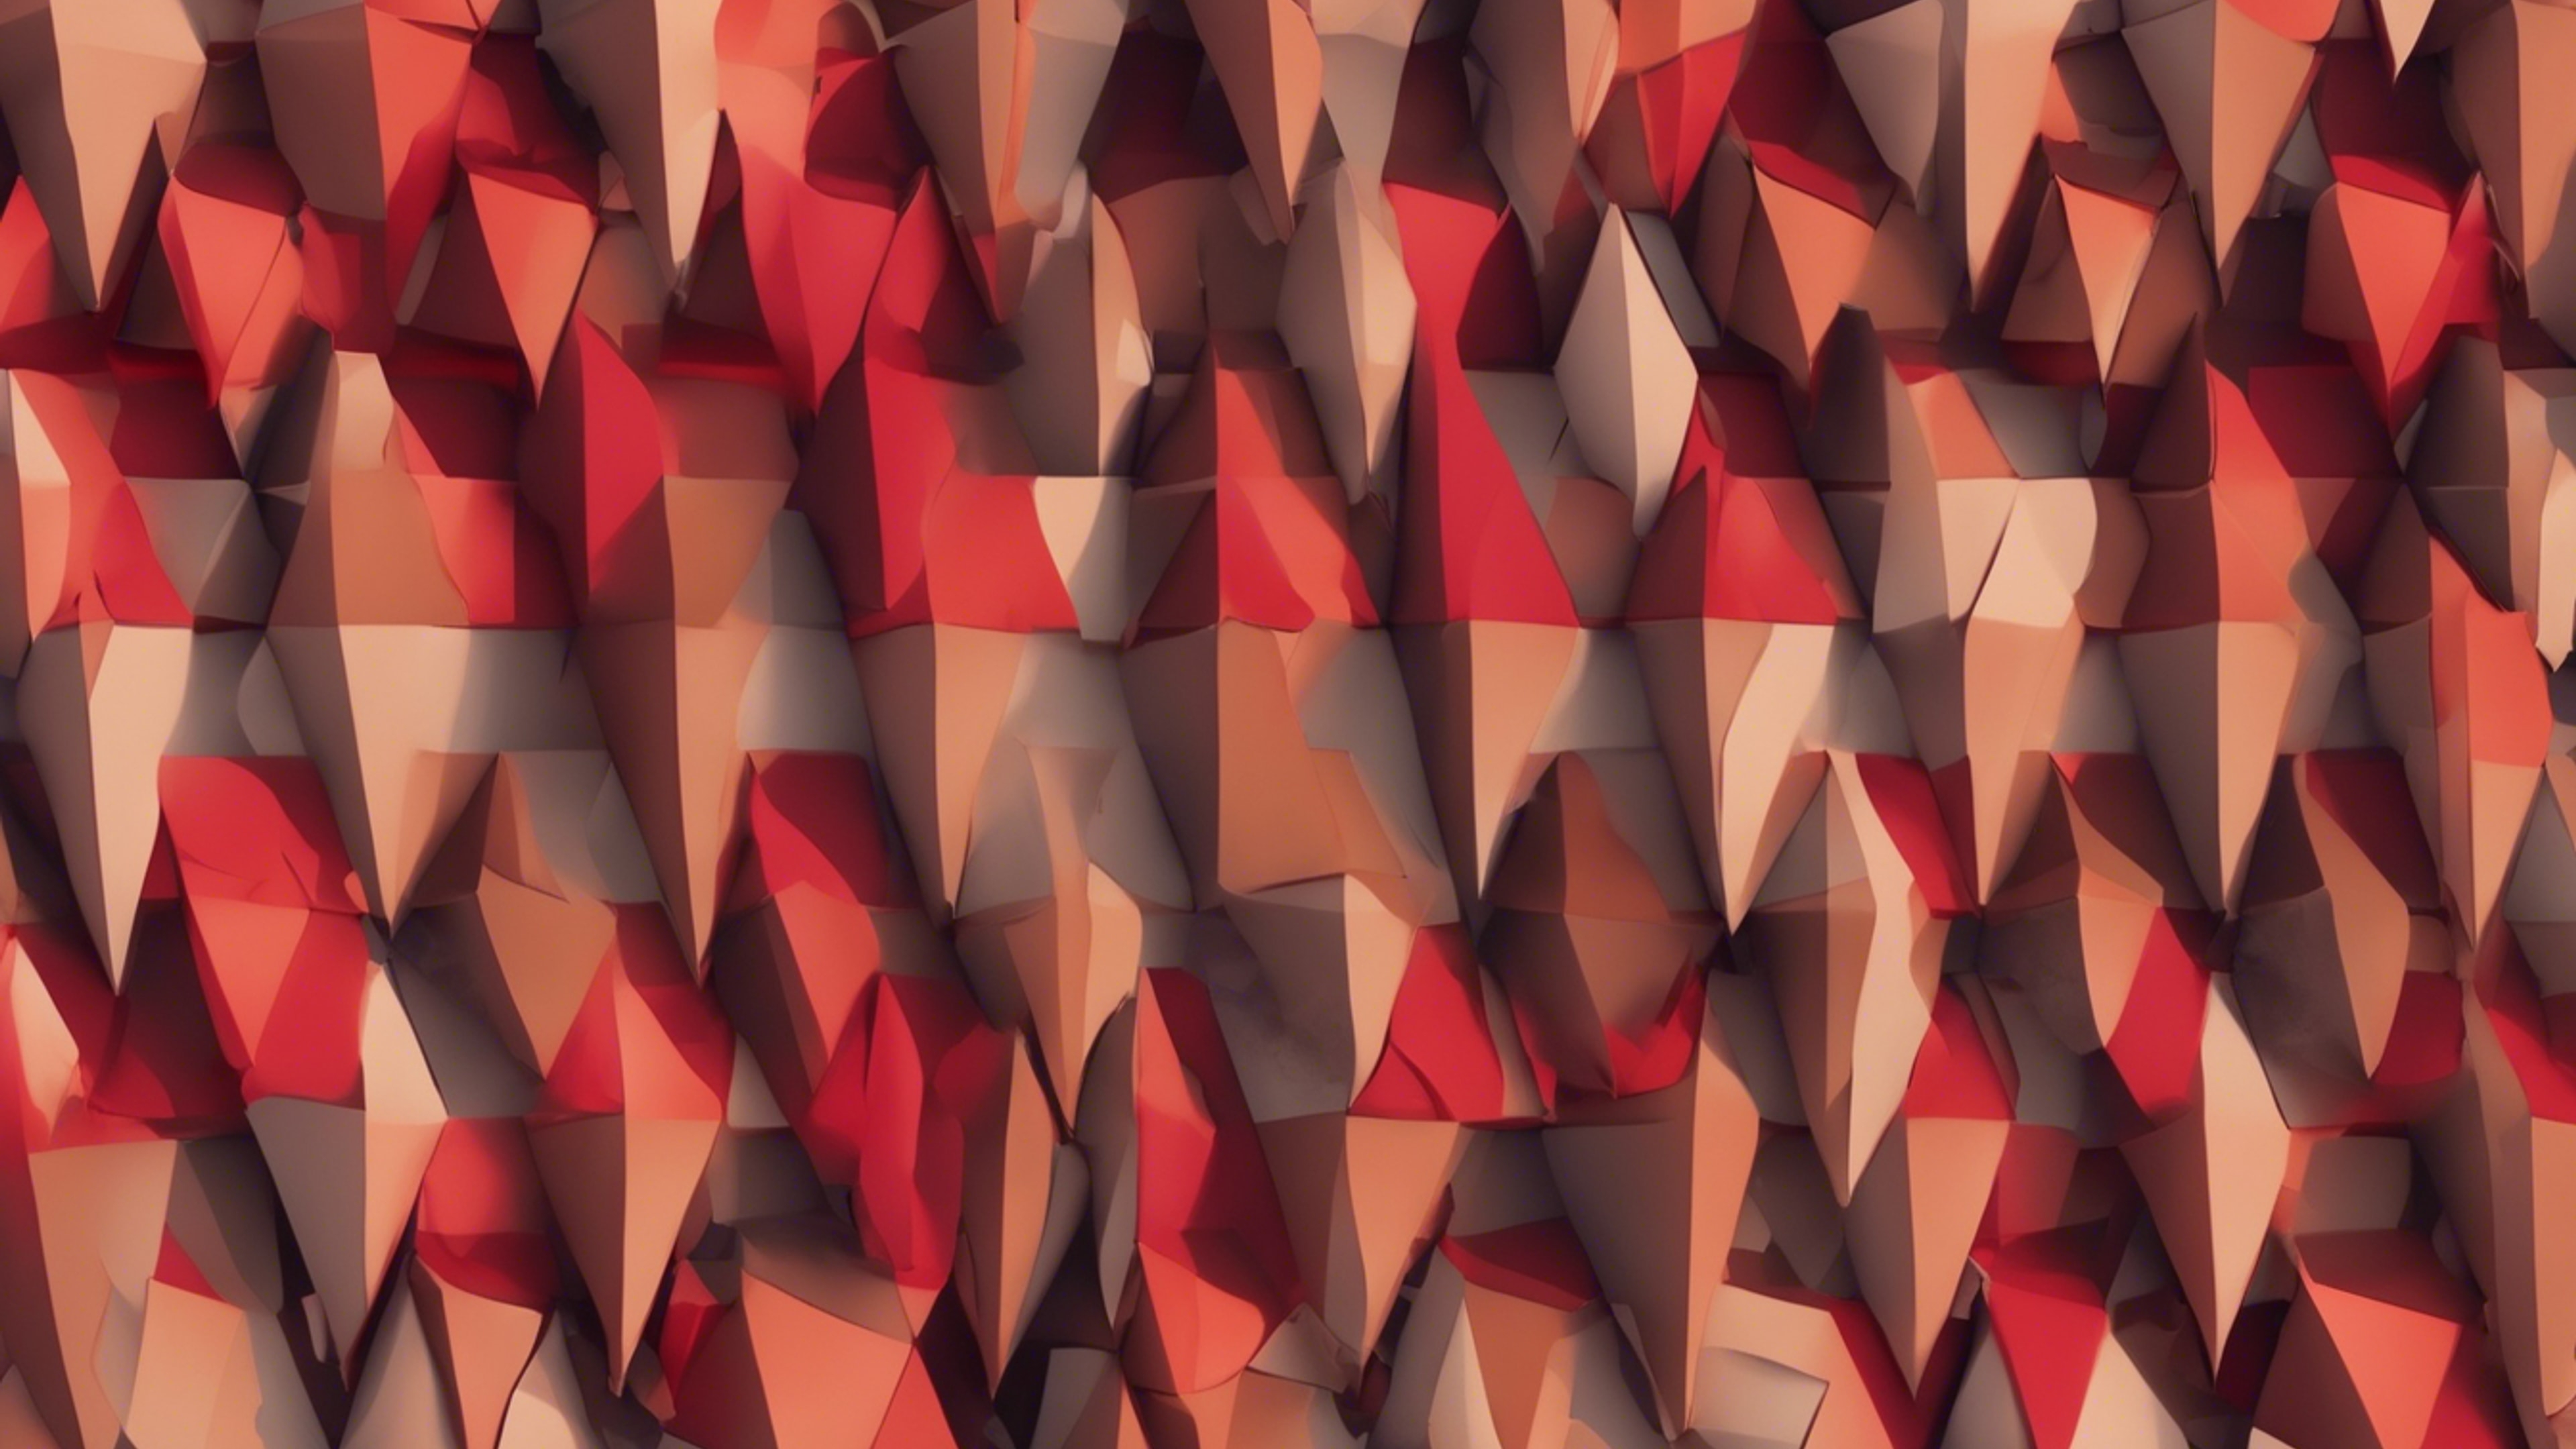 A geometrical abstract pattern consisting of trapeziums in shades of vibrant red and muted brown. Tapet[25af3713355d4095863a]